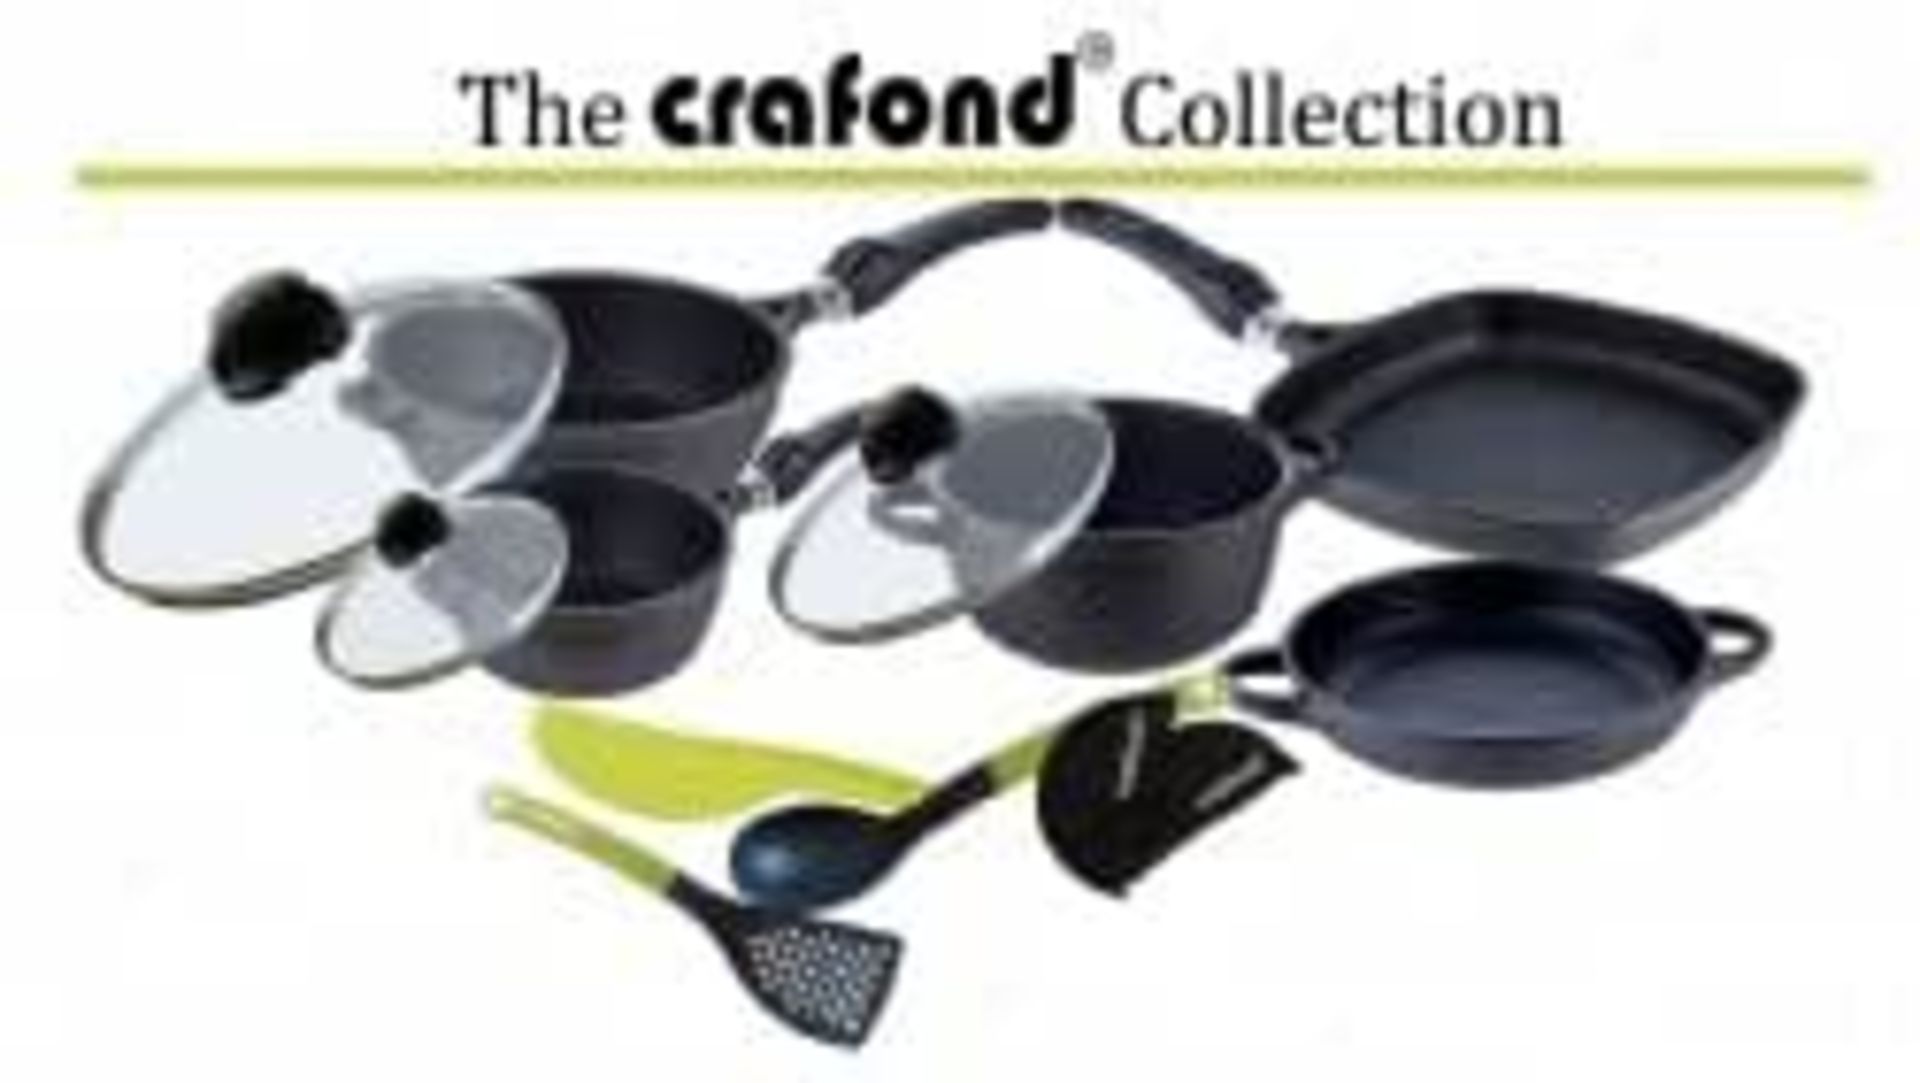 Crafond 32cm Saute Pan with detachable handle and lid - Image 2 of 4